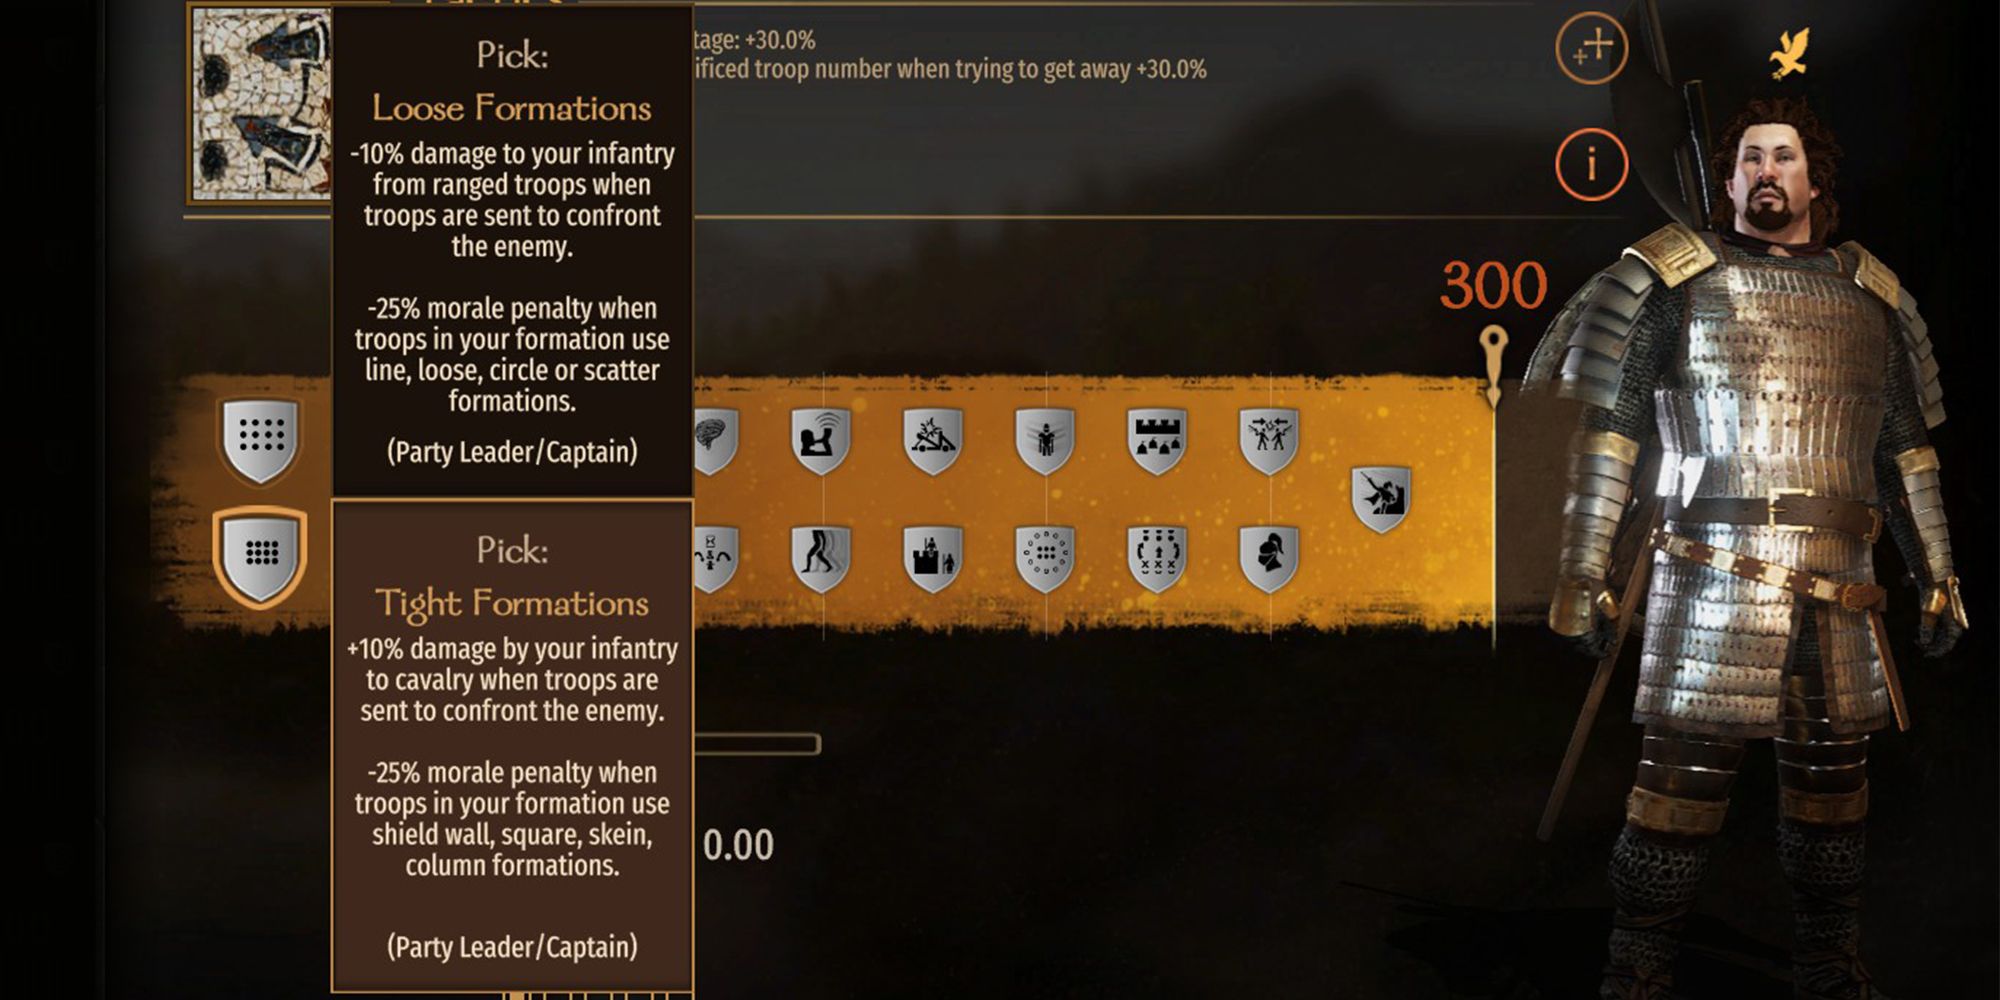 Tactics Tight Formations Perk Menu Description Increases infantry damage to cavalry by 10% when troops are dispatched to face the enemy.  -25% morale penalty when units in your formation use shield wall, square, skein, or column formations.